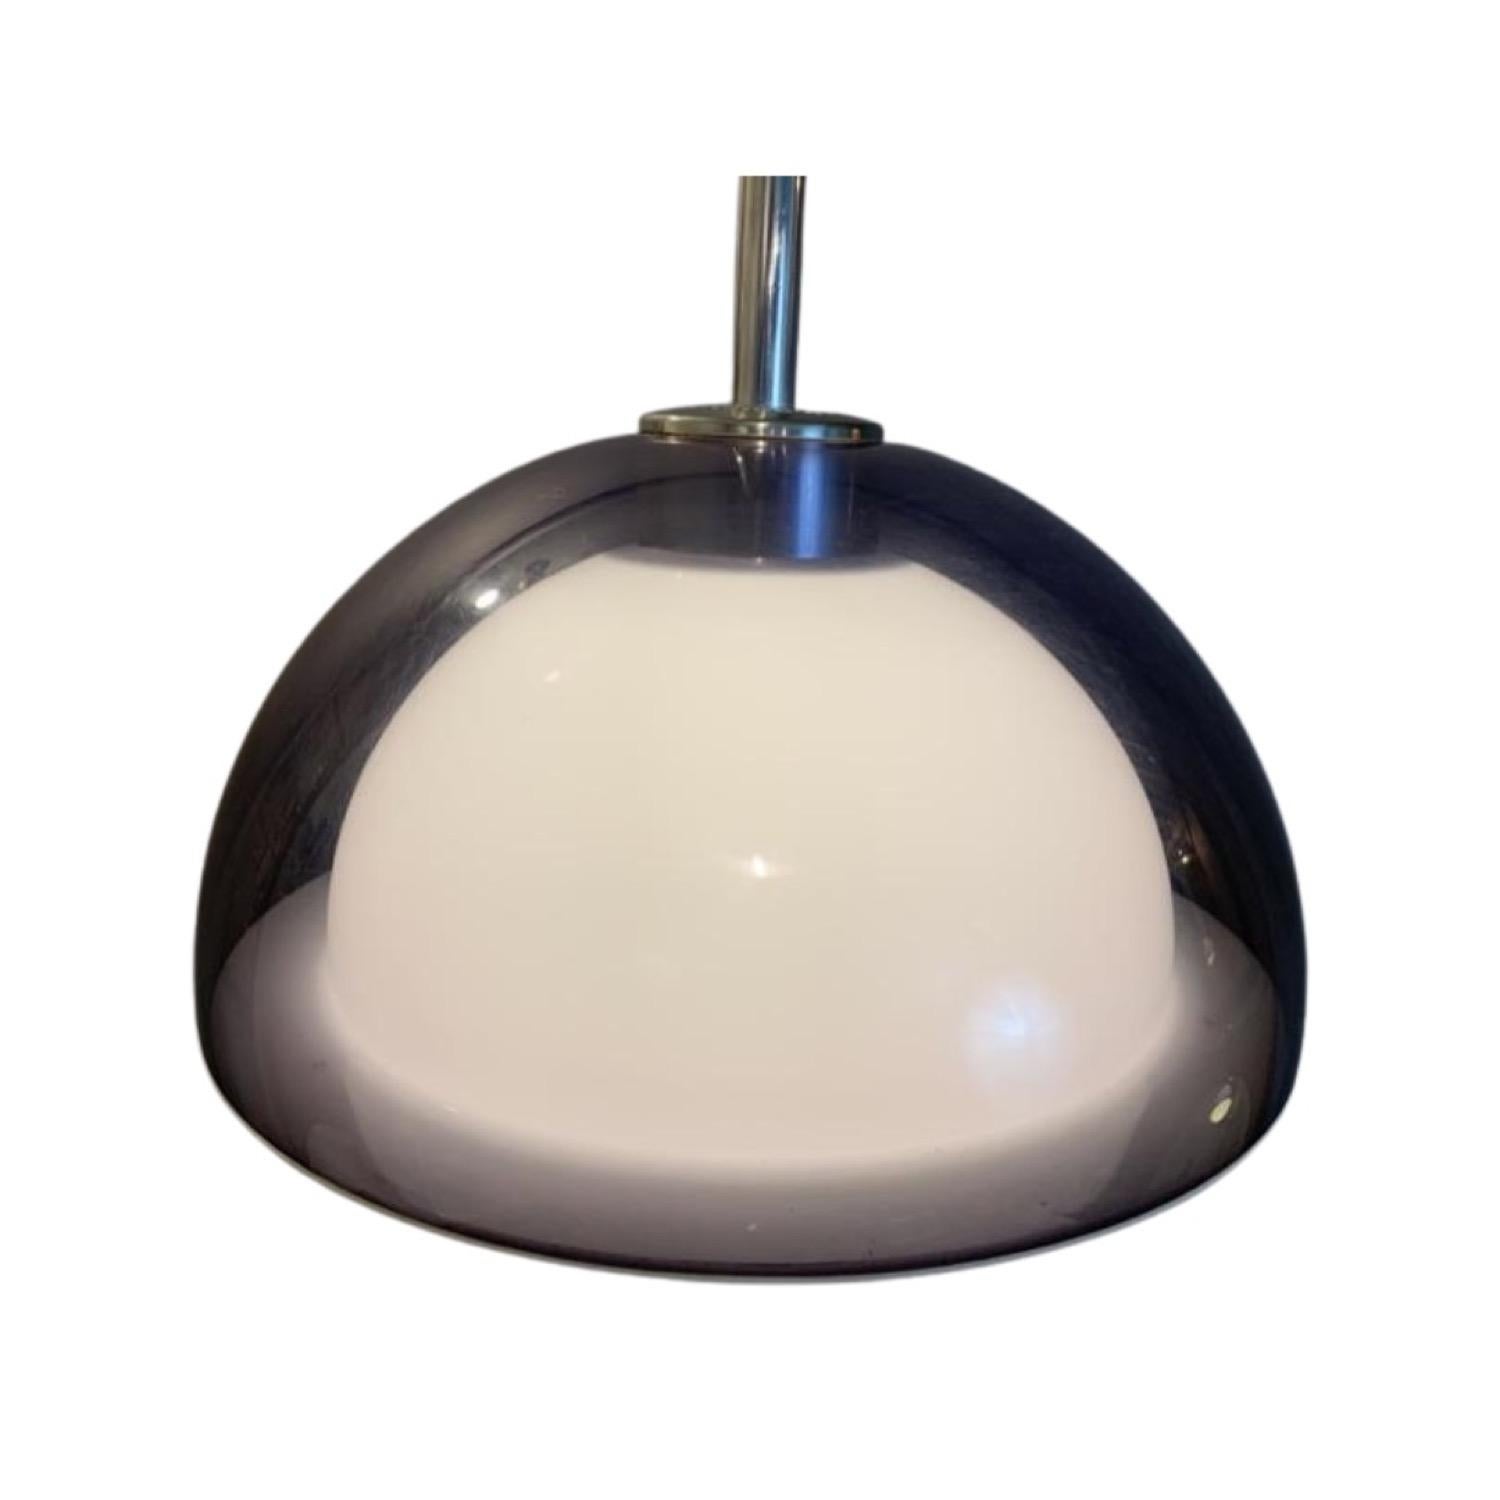 1960s, space-age, UFO, ‘Series 3000’ pendant, ceiling, hanging light which was designed by Robert Welch in 1966 and manufactured by Lumitron. 

This mushroom-shaped light consists of an outer see-through violet or light purple perspex shade with